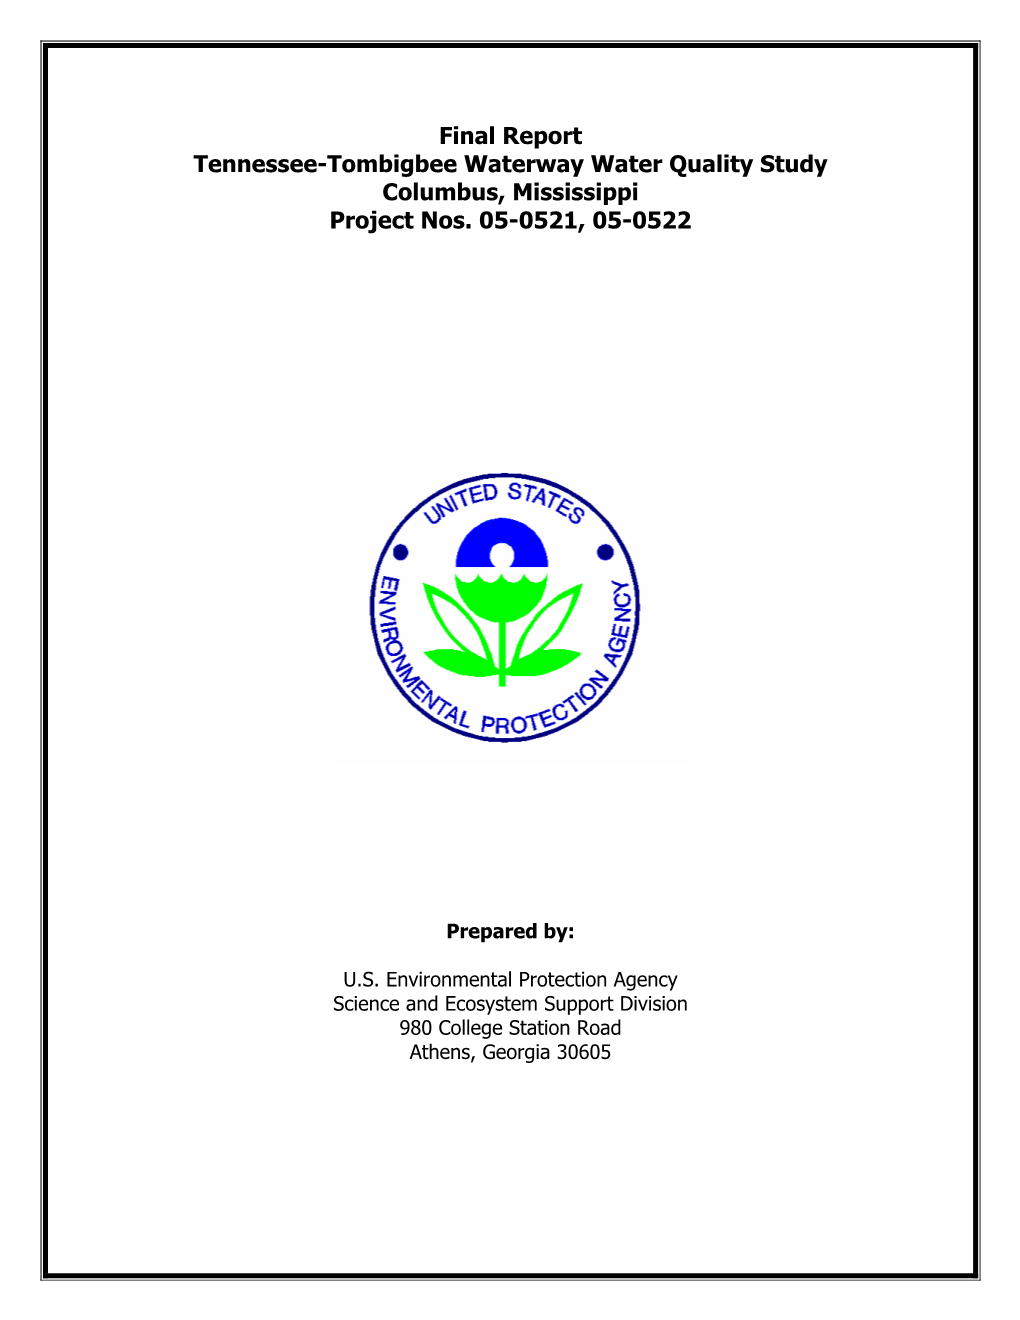 Final Report Tennessee-Tombigbee Waterway Water Quality Study Columbus, Mississippi Project Nos